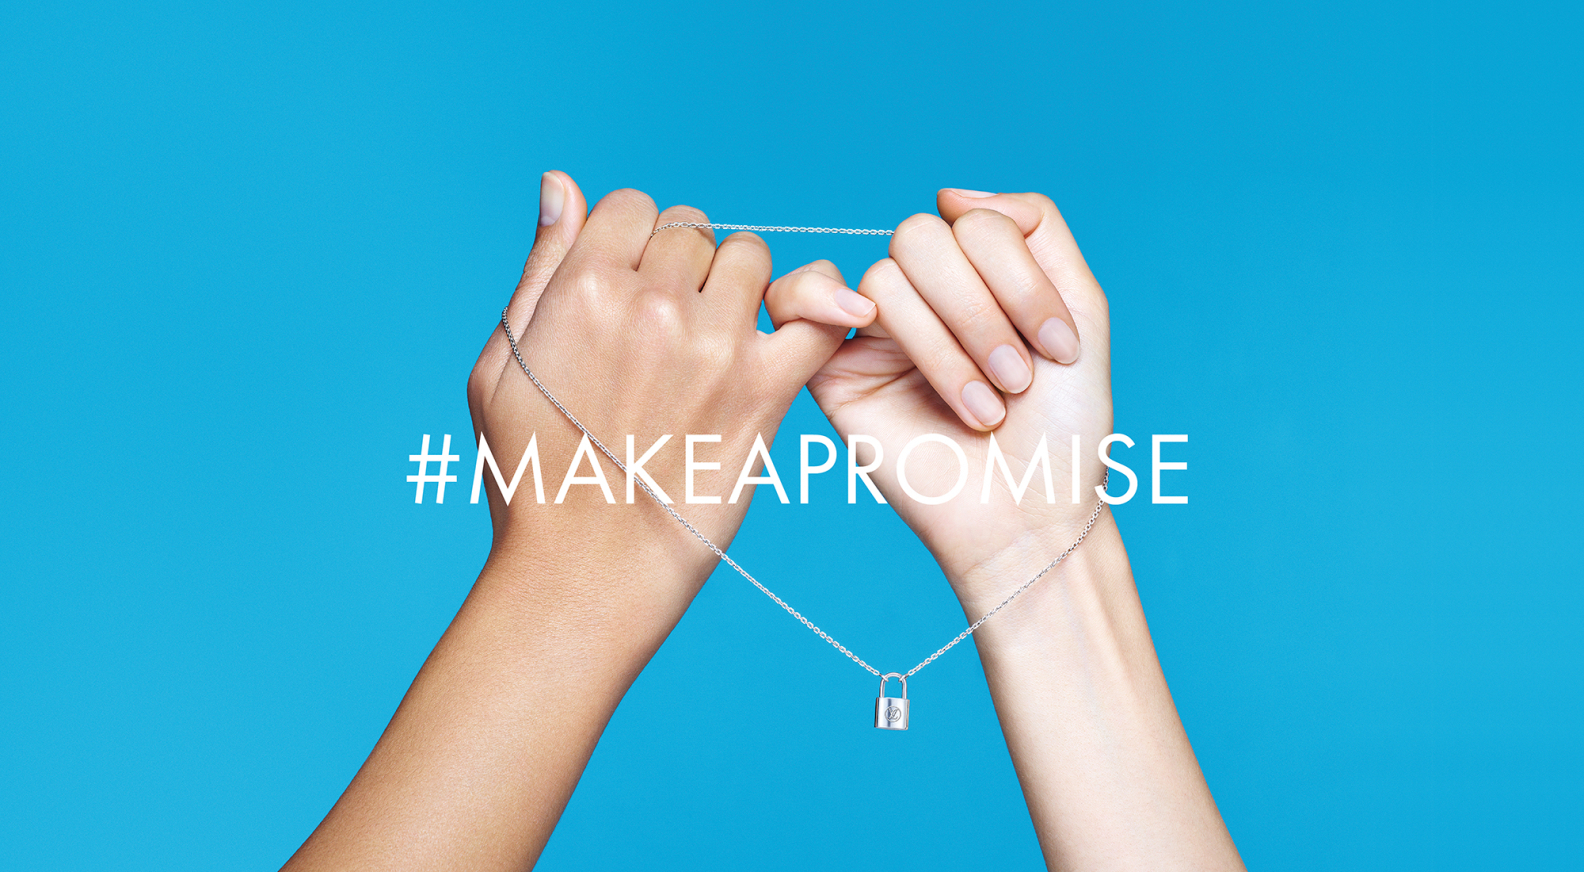 Louis Vuitton on X: #MAKEAPROMISE with #LouisVuitton. For the